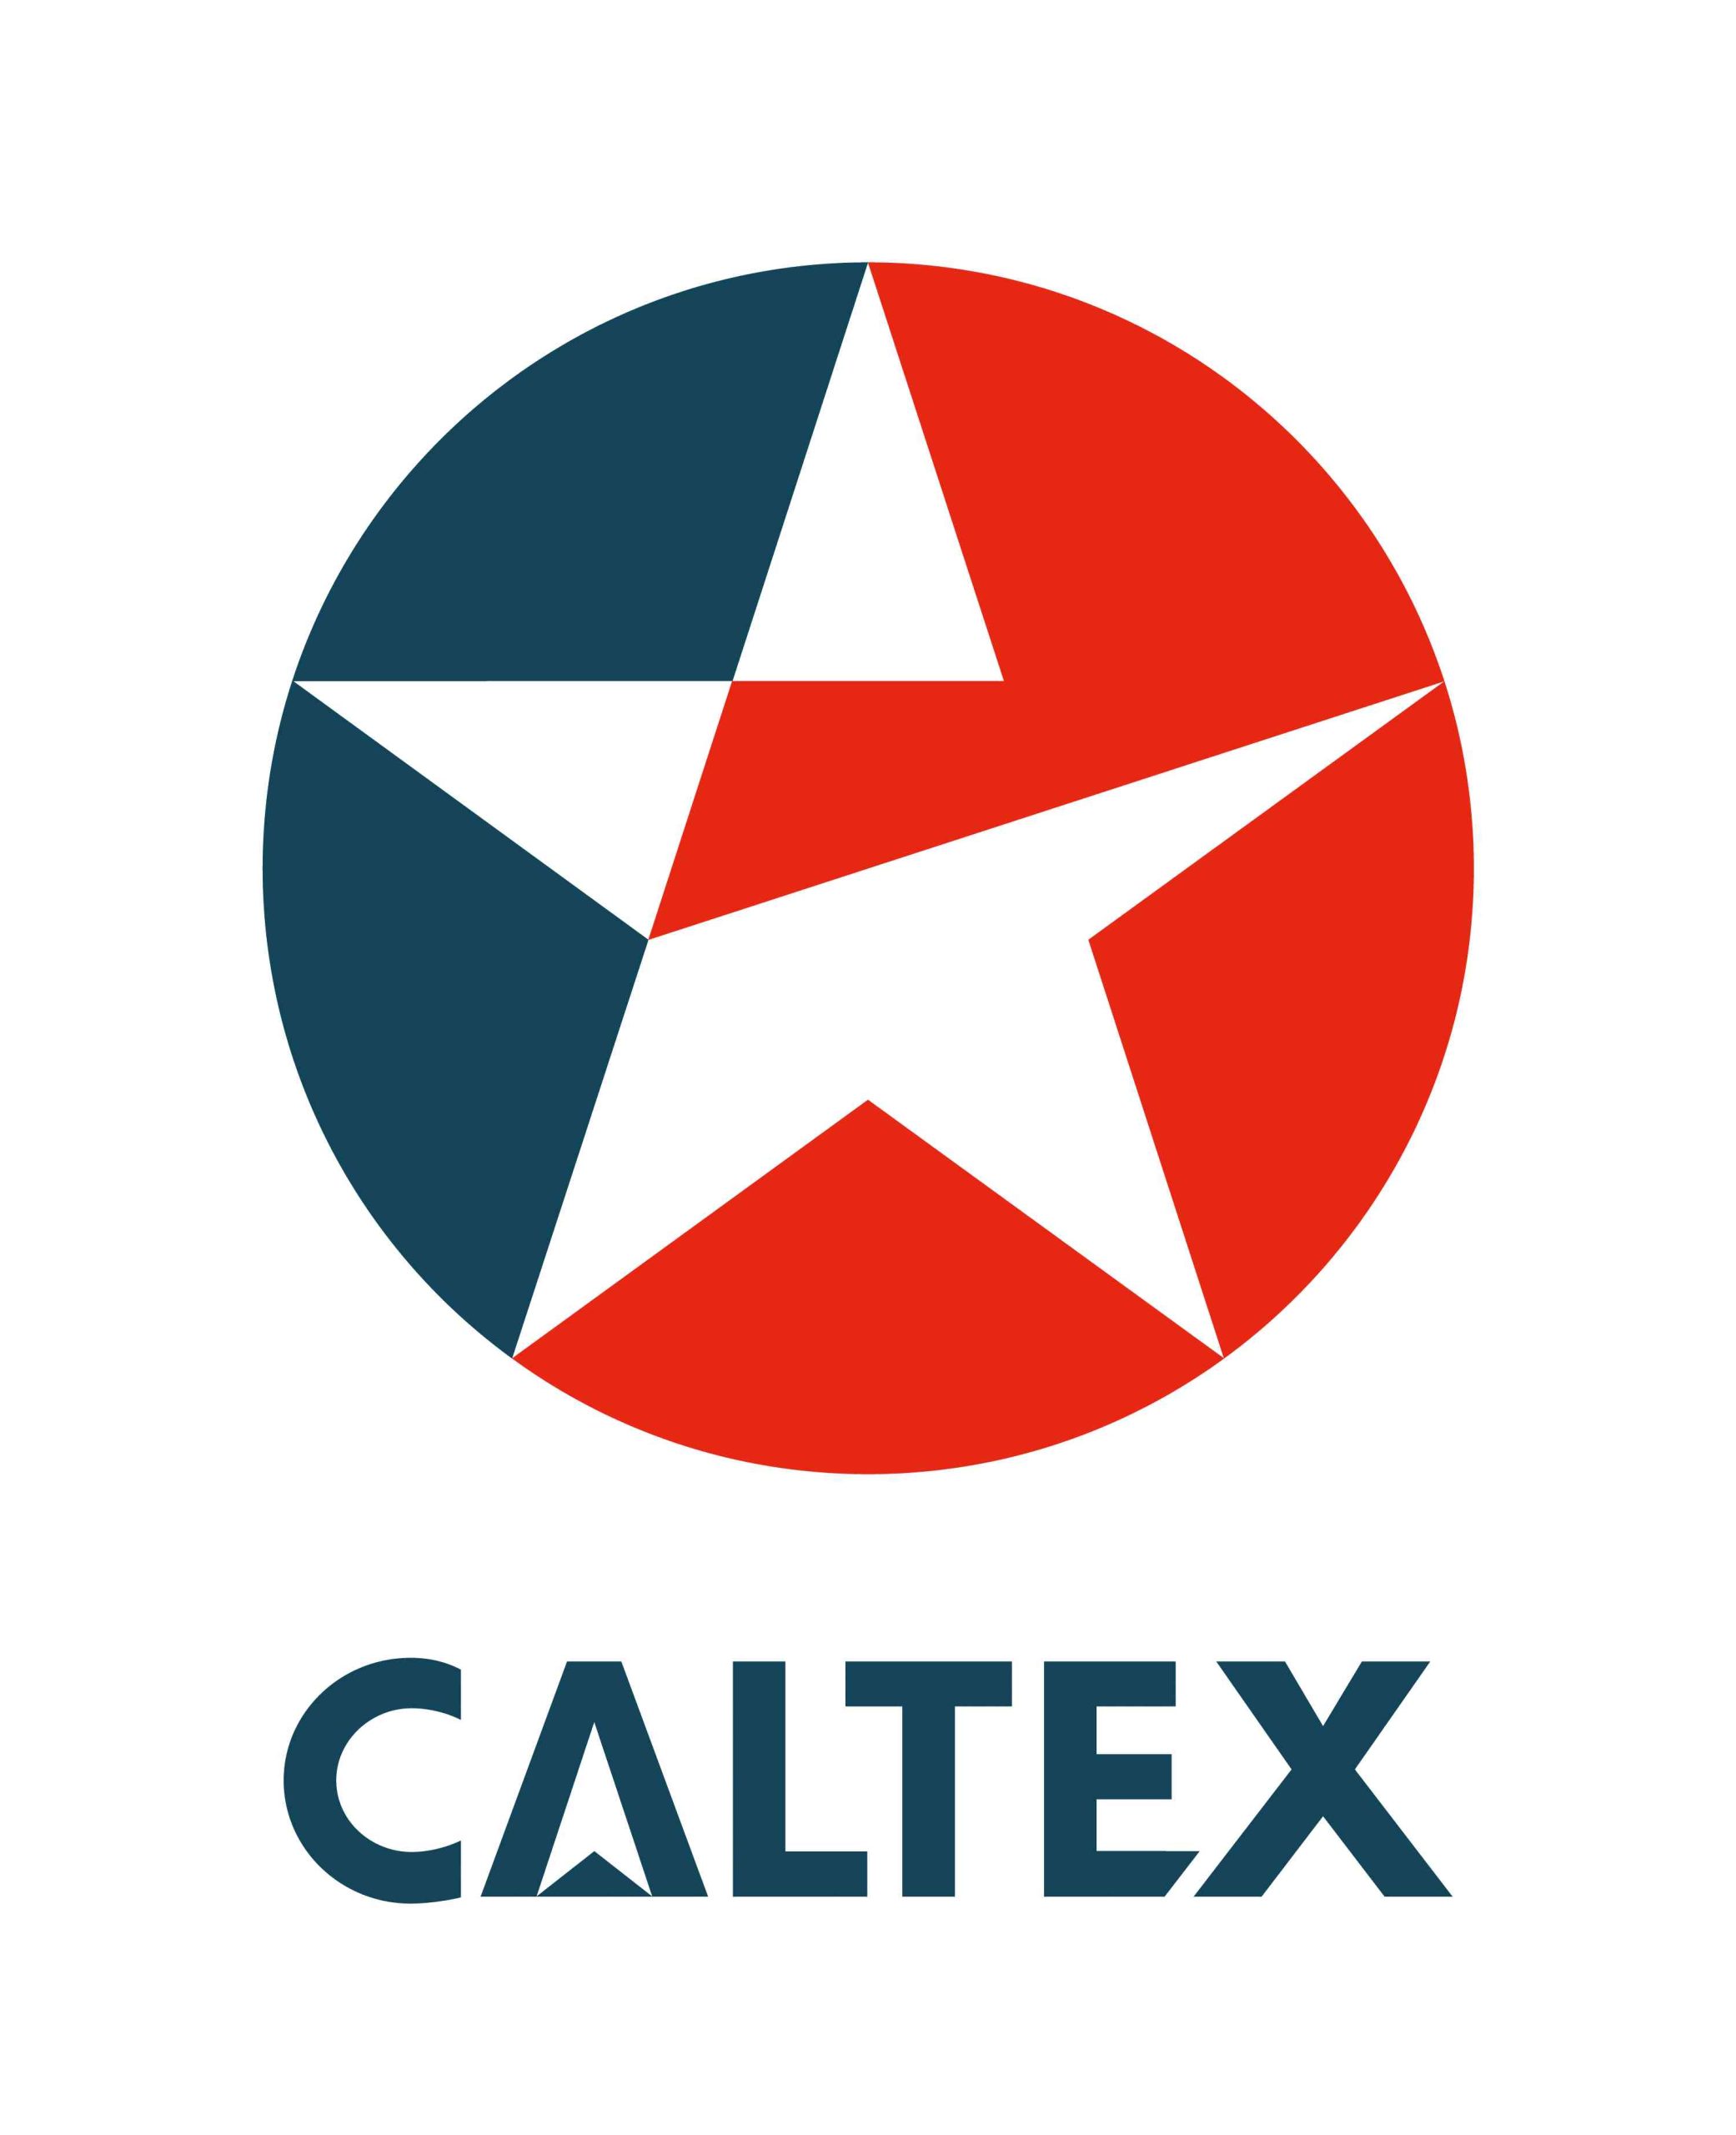 Caltex fuel price increase for March 15, 2022